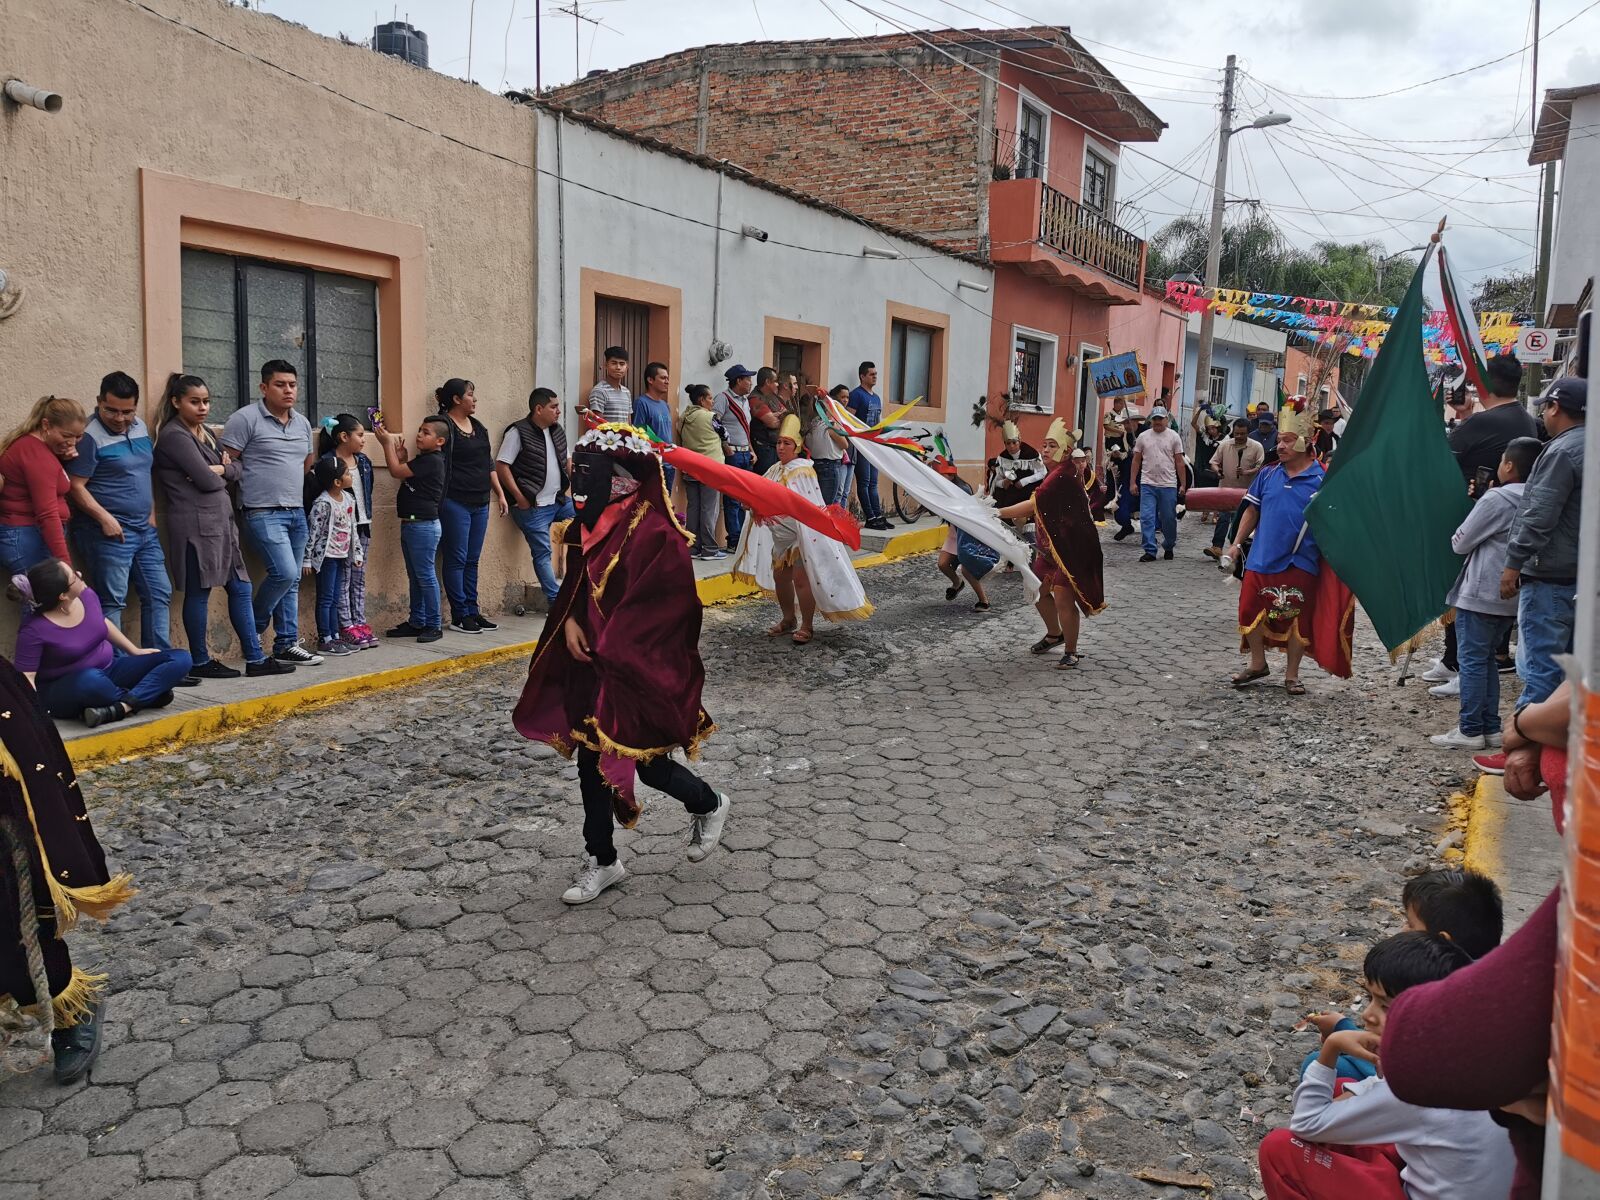 HUAWEI P30 Pro sample photo. Culture, kings, cajititlán photography